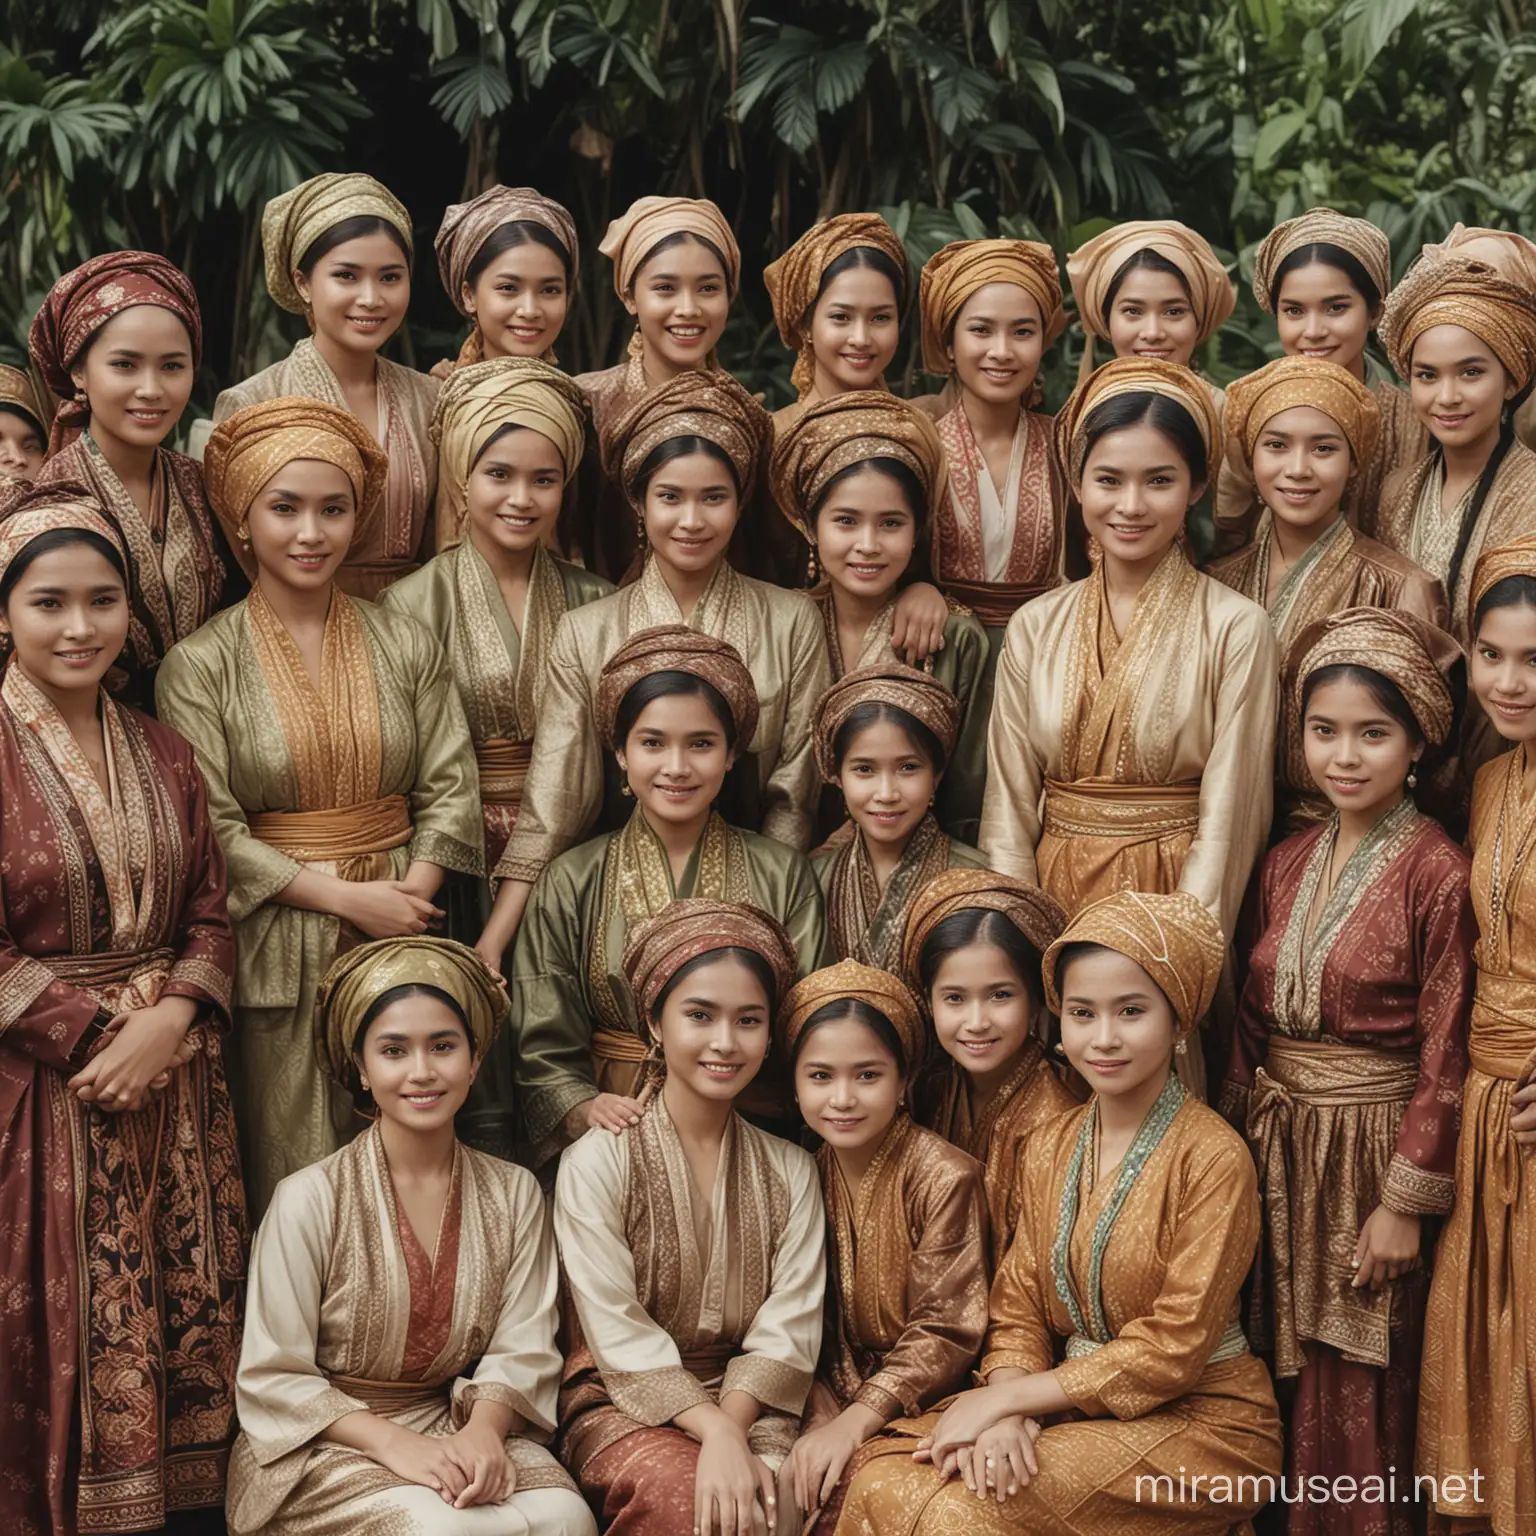 A clandestine gathering of women and girls in traditional Javanese attire, eagerly absorbing knowledge from Kartini, highlighting the grassroots movement for education and women's rights during colonial rule.